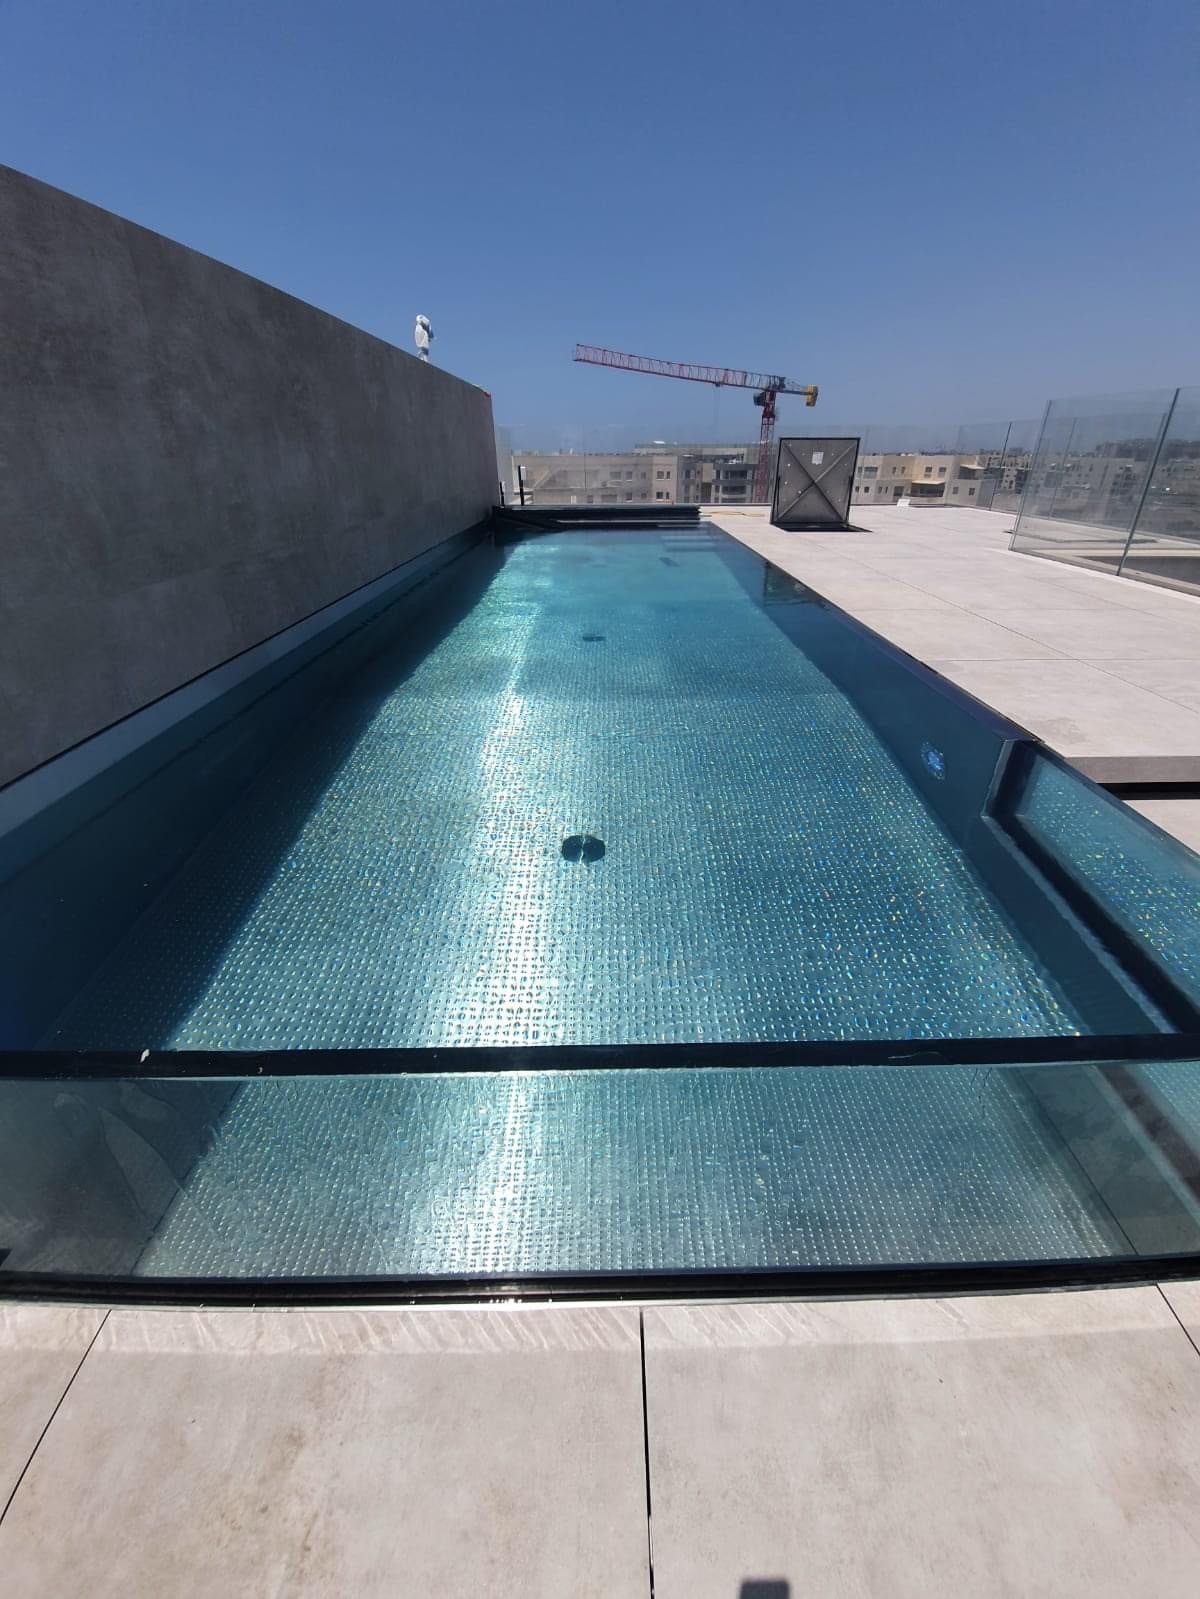 IMAGINOX glass wall within stainless steel pool